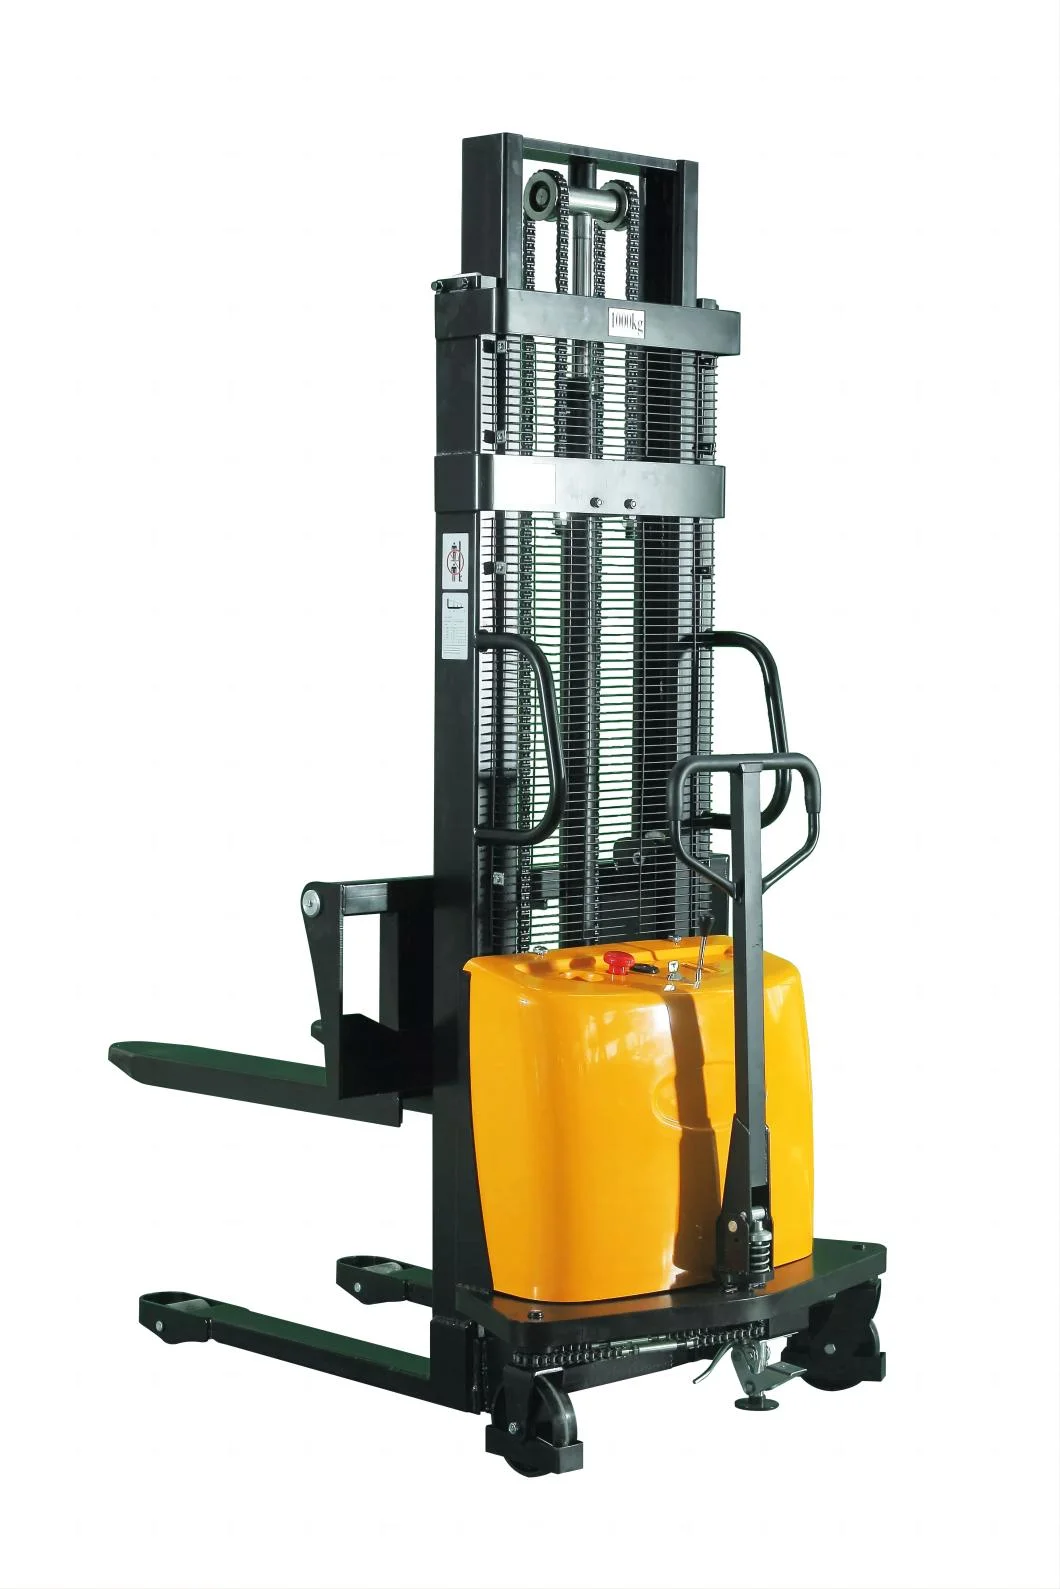 Semi Electric Hydraulic Pallet Stacker 1500 2000 Kg Electric Transporting Fork Lift Apilador Electrico